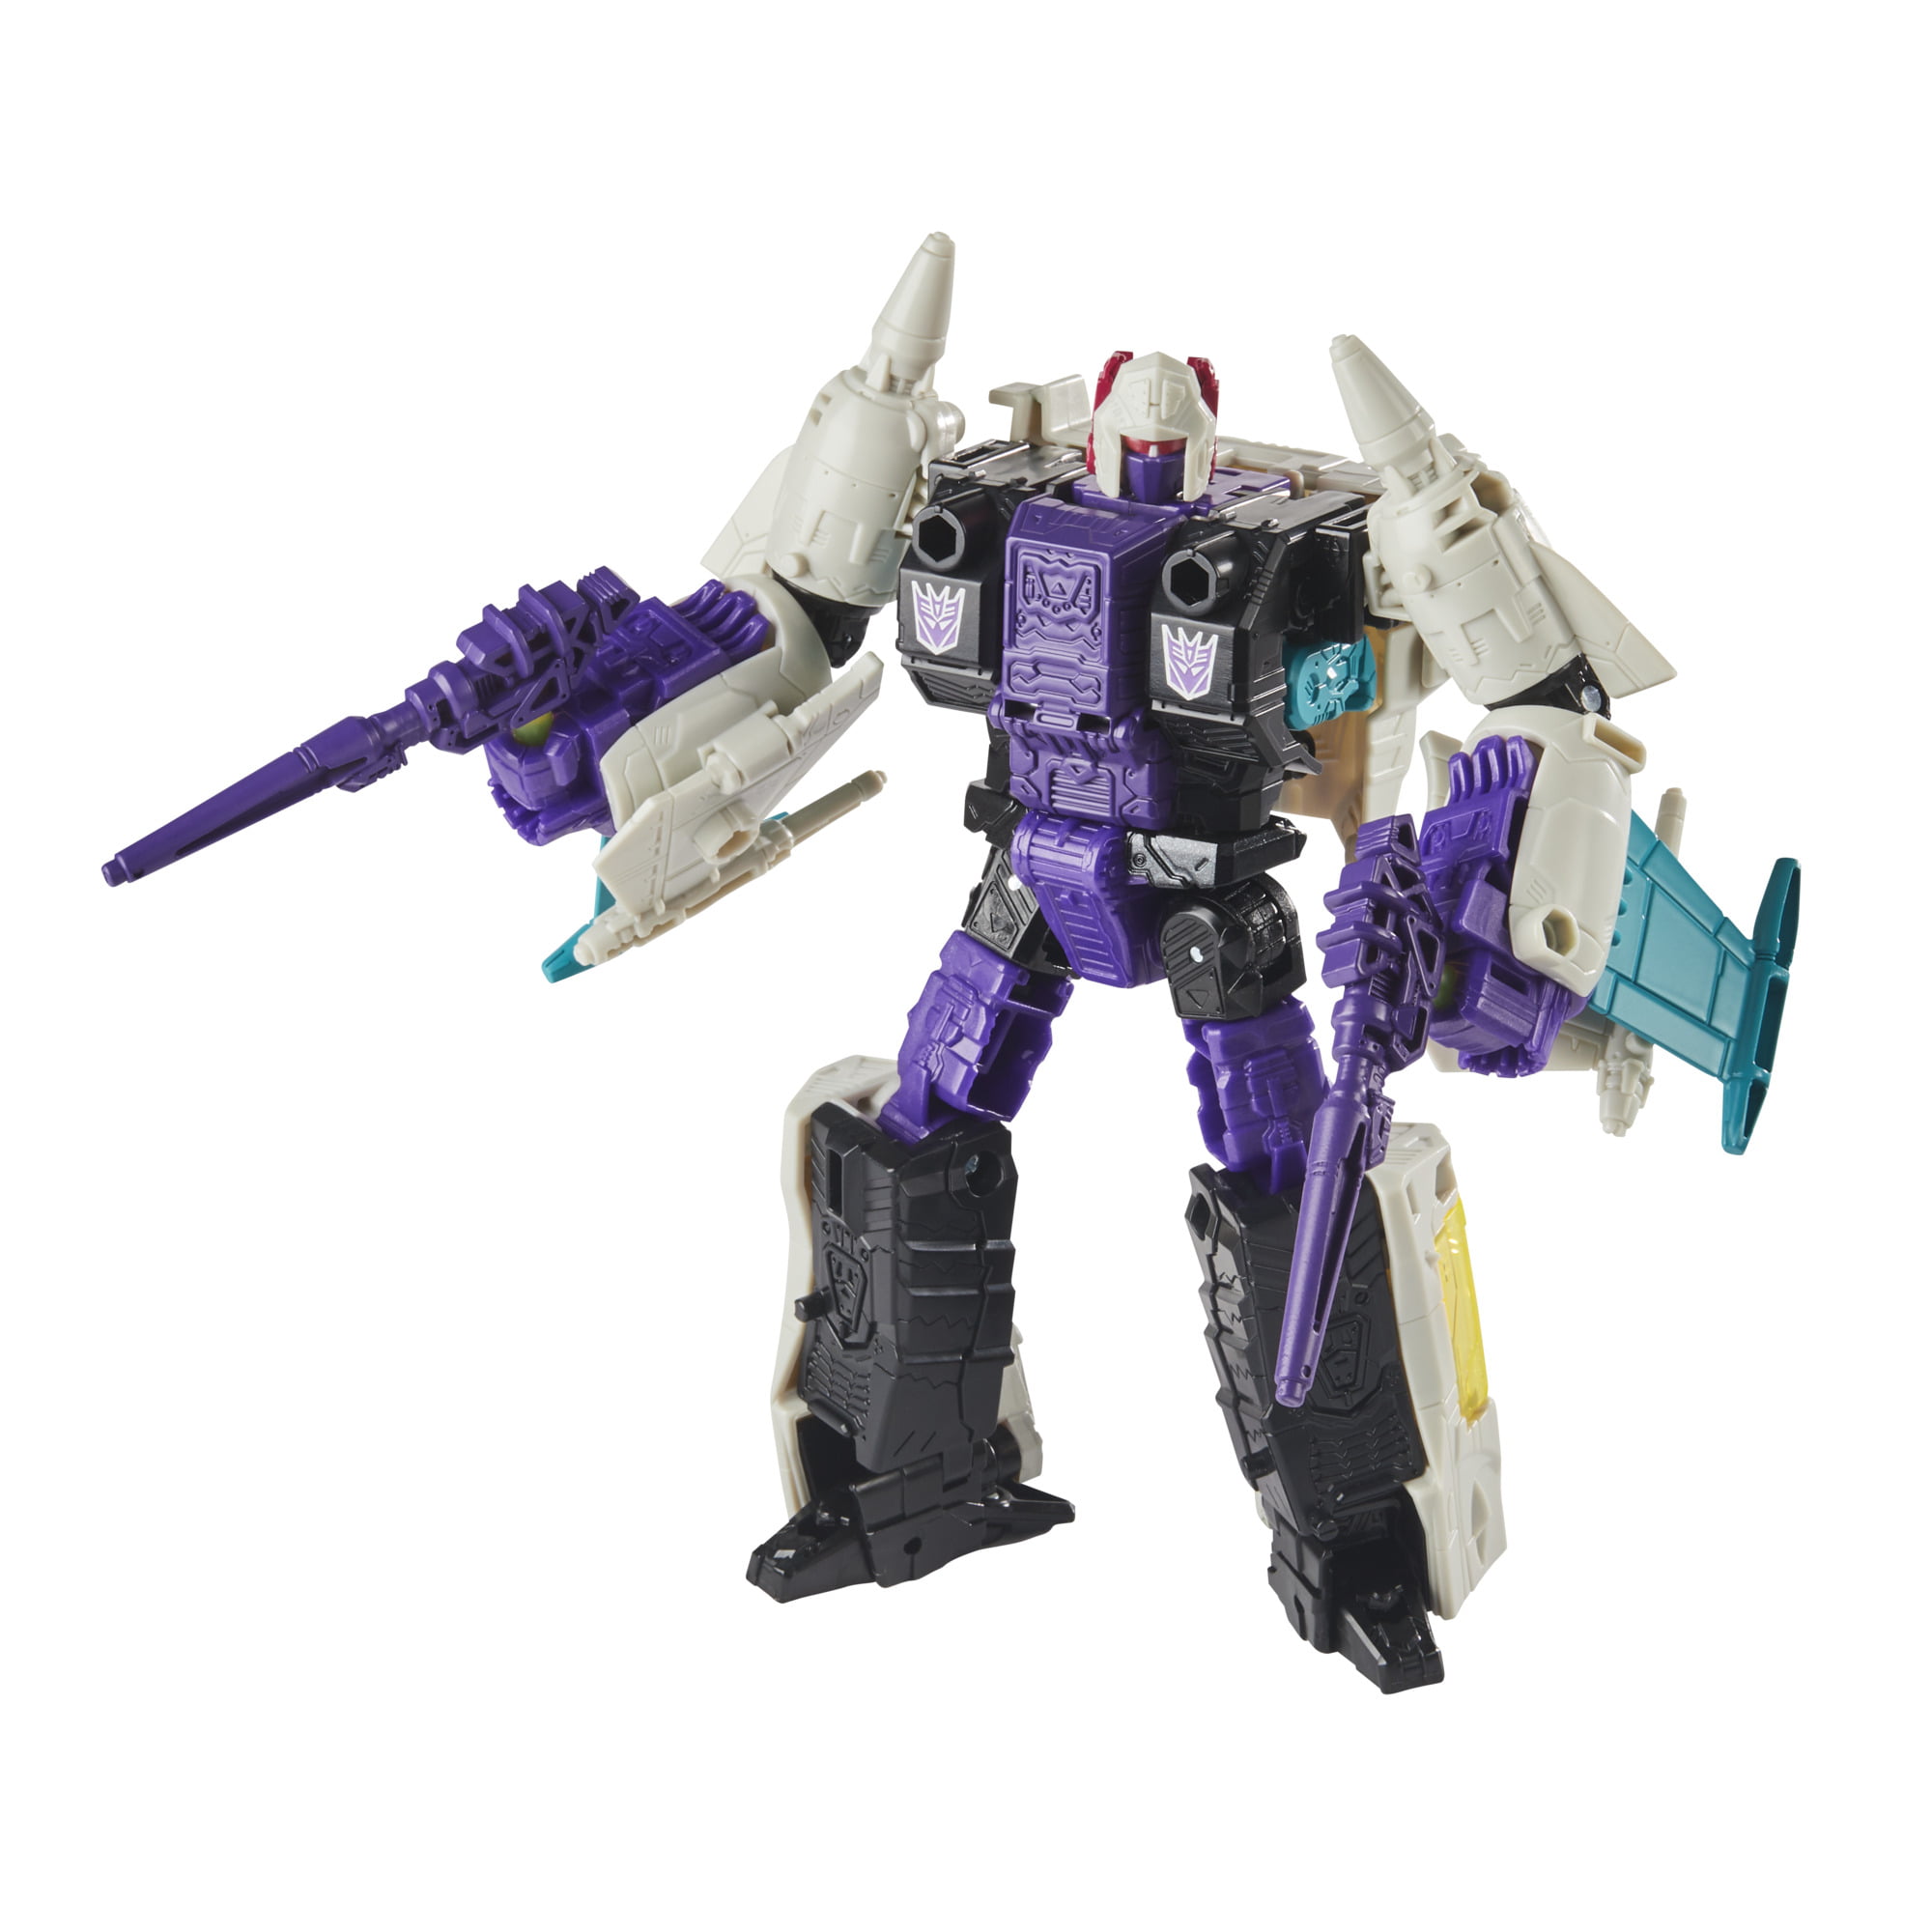 8 and Up Transformers Toys Generations War for Cybertron 7-inch Earthrise Voyager WFC-E21 Decepticon Snapdragon Triple Changer Action Figure